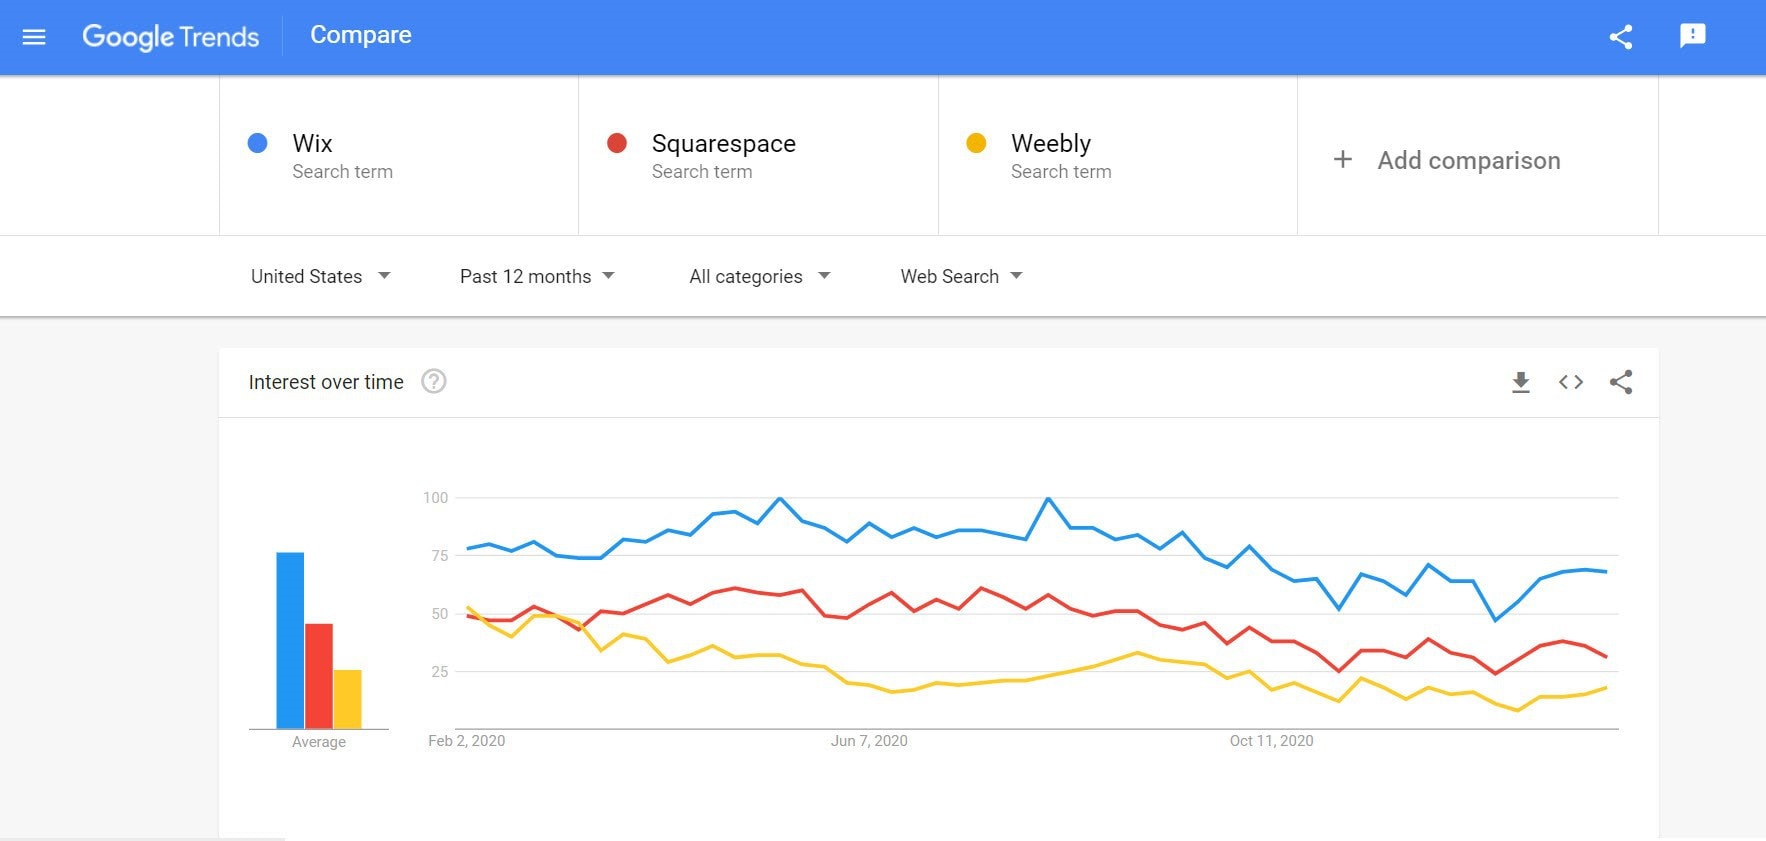 Google Trends report Wix, Squarespace, and Weebly